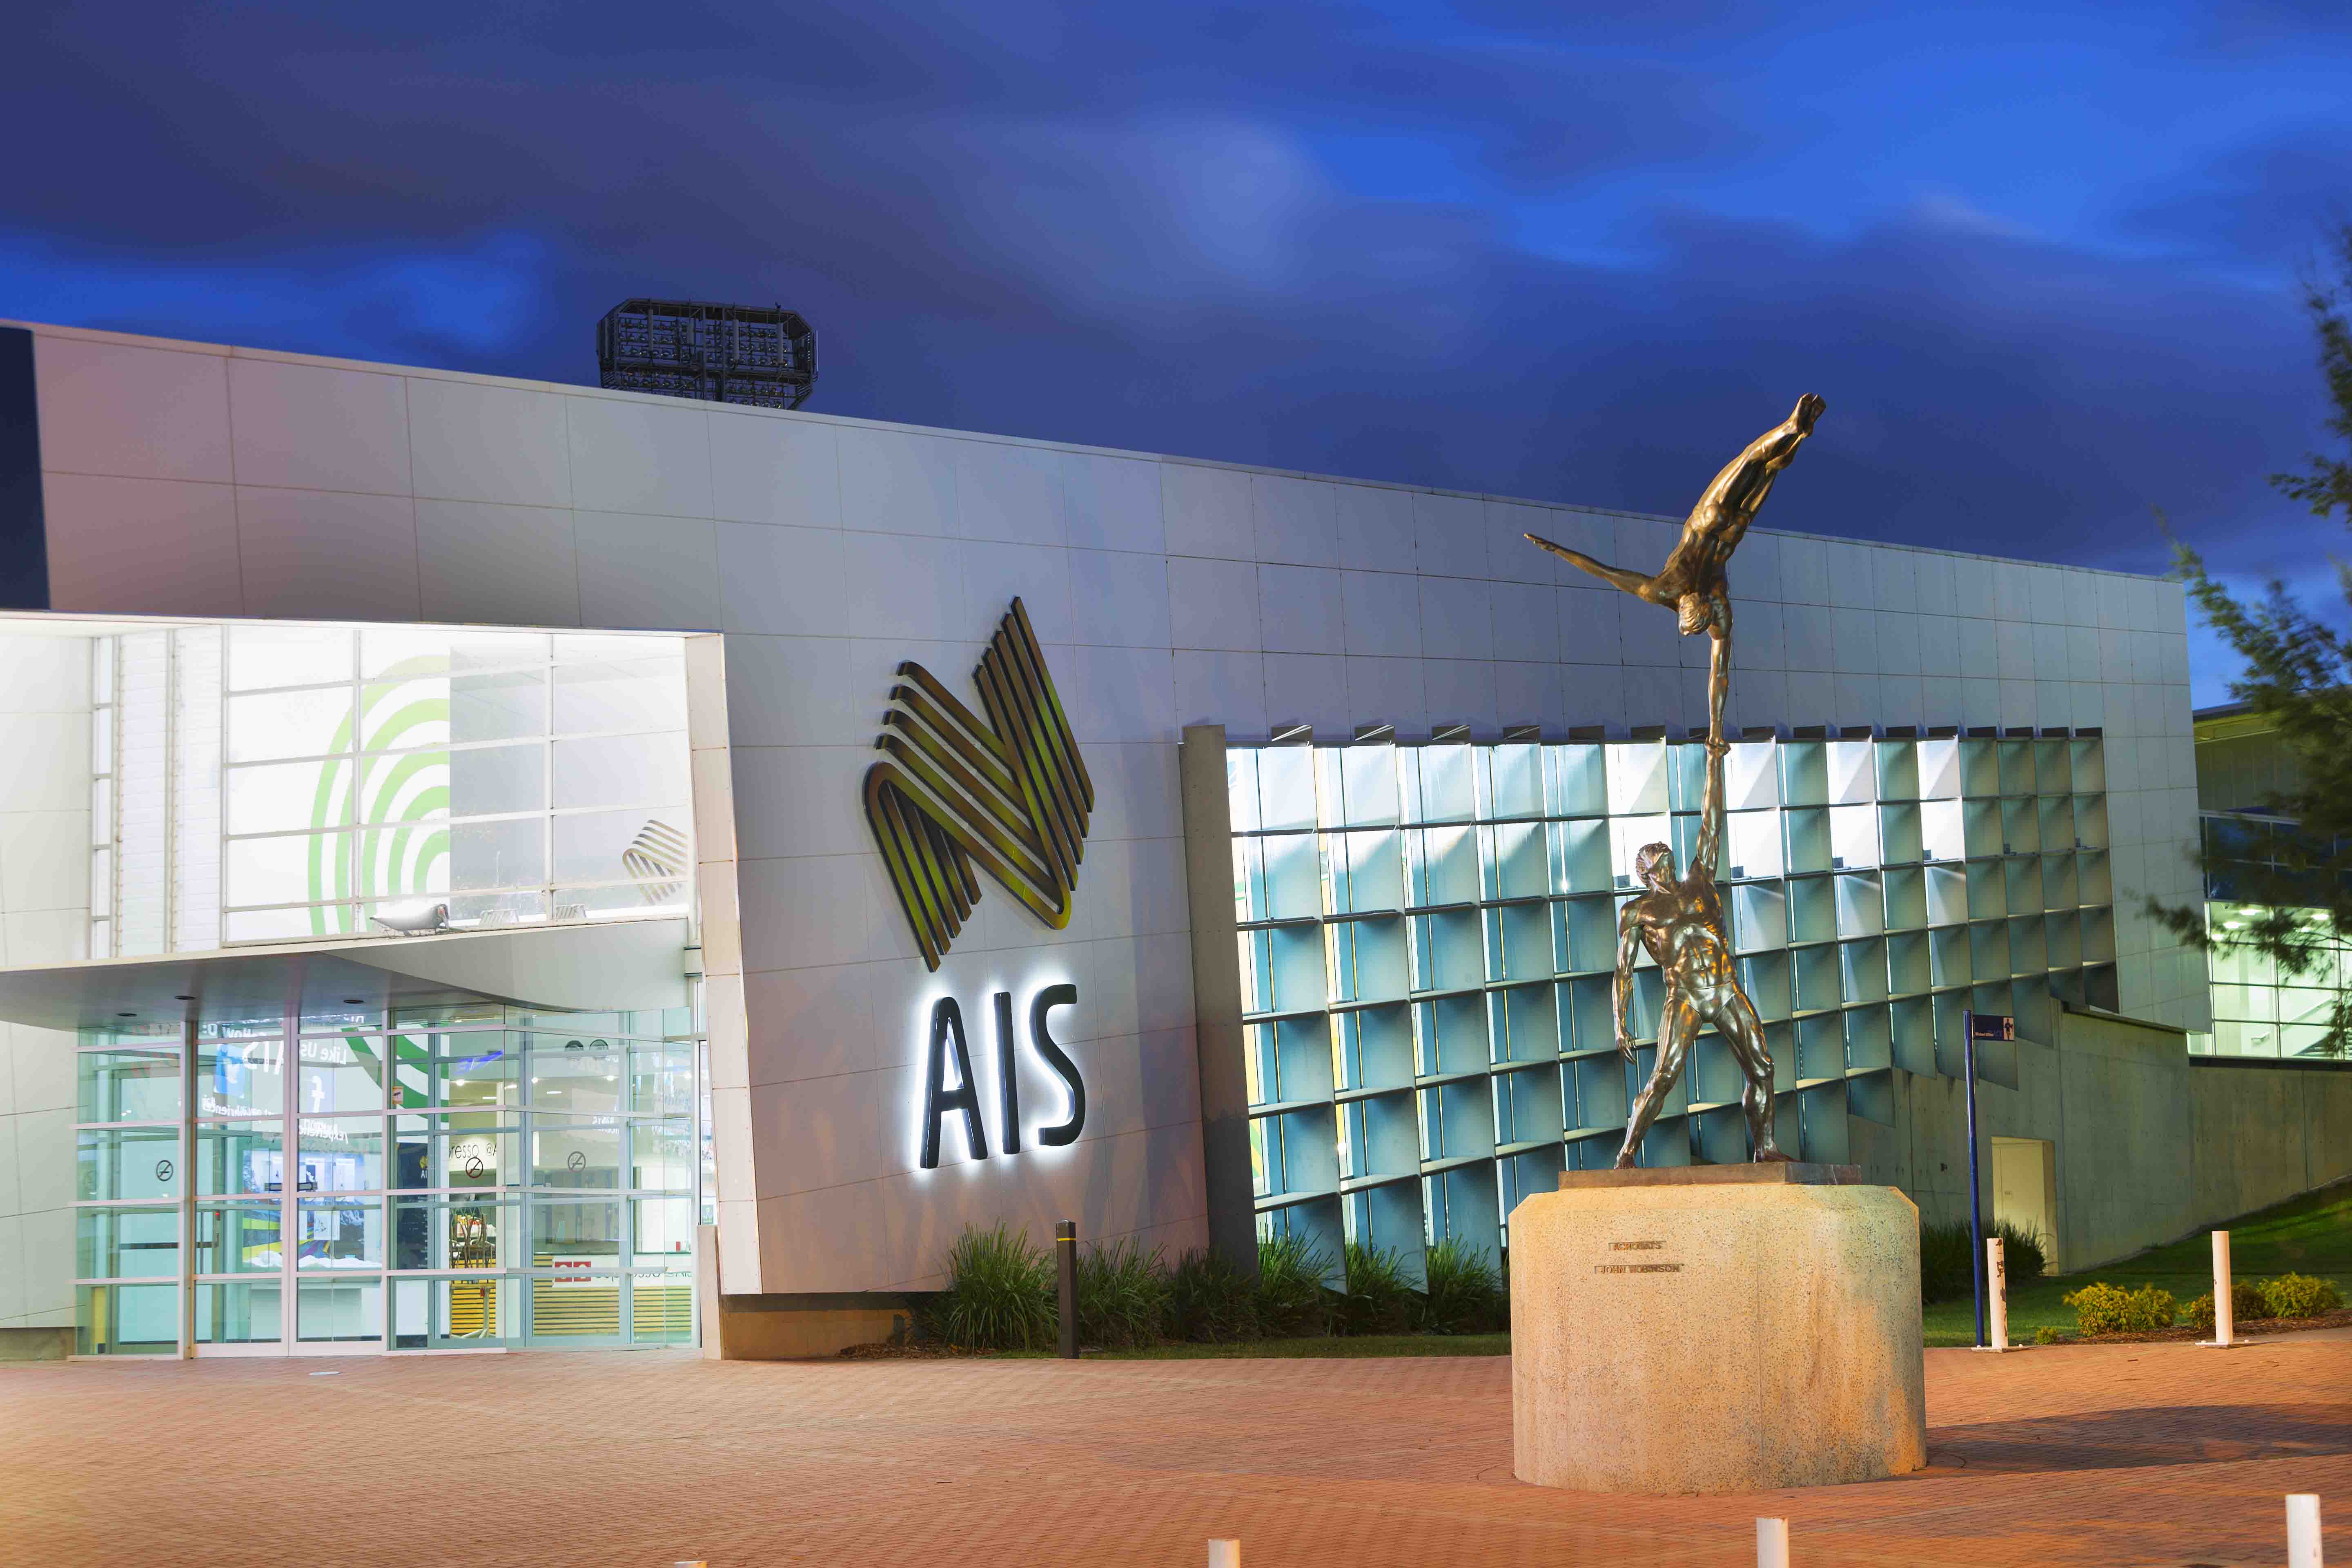 Public activity suspended on AIS Canberra campus